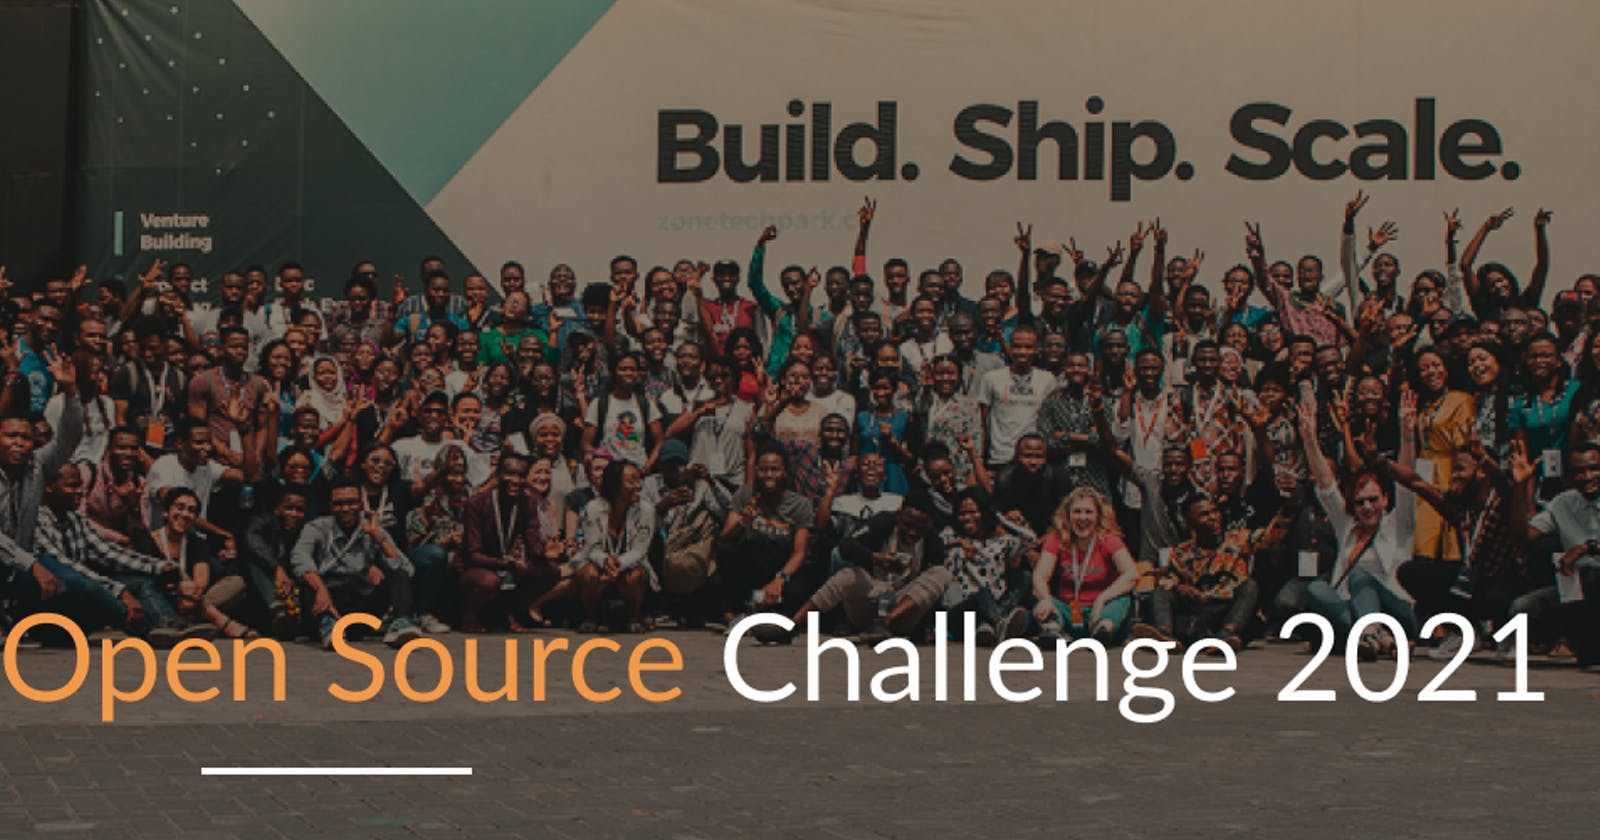 Announcing the Open Source Challenge 2021